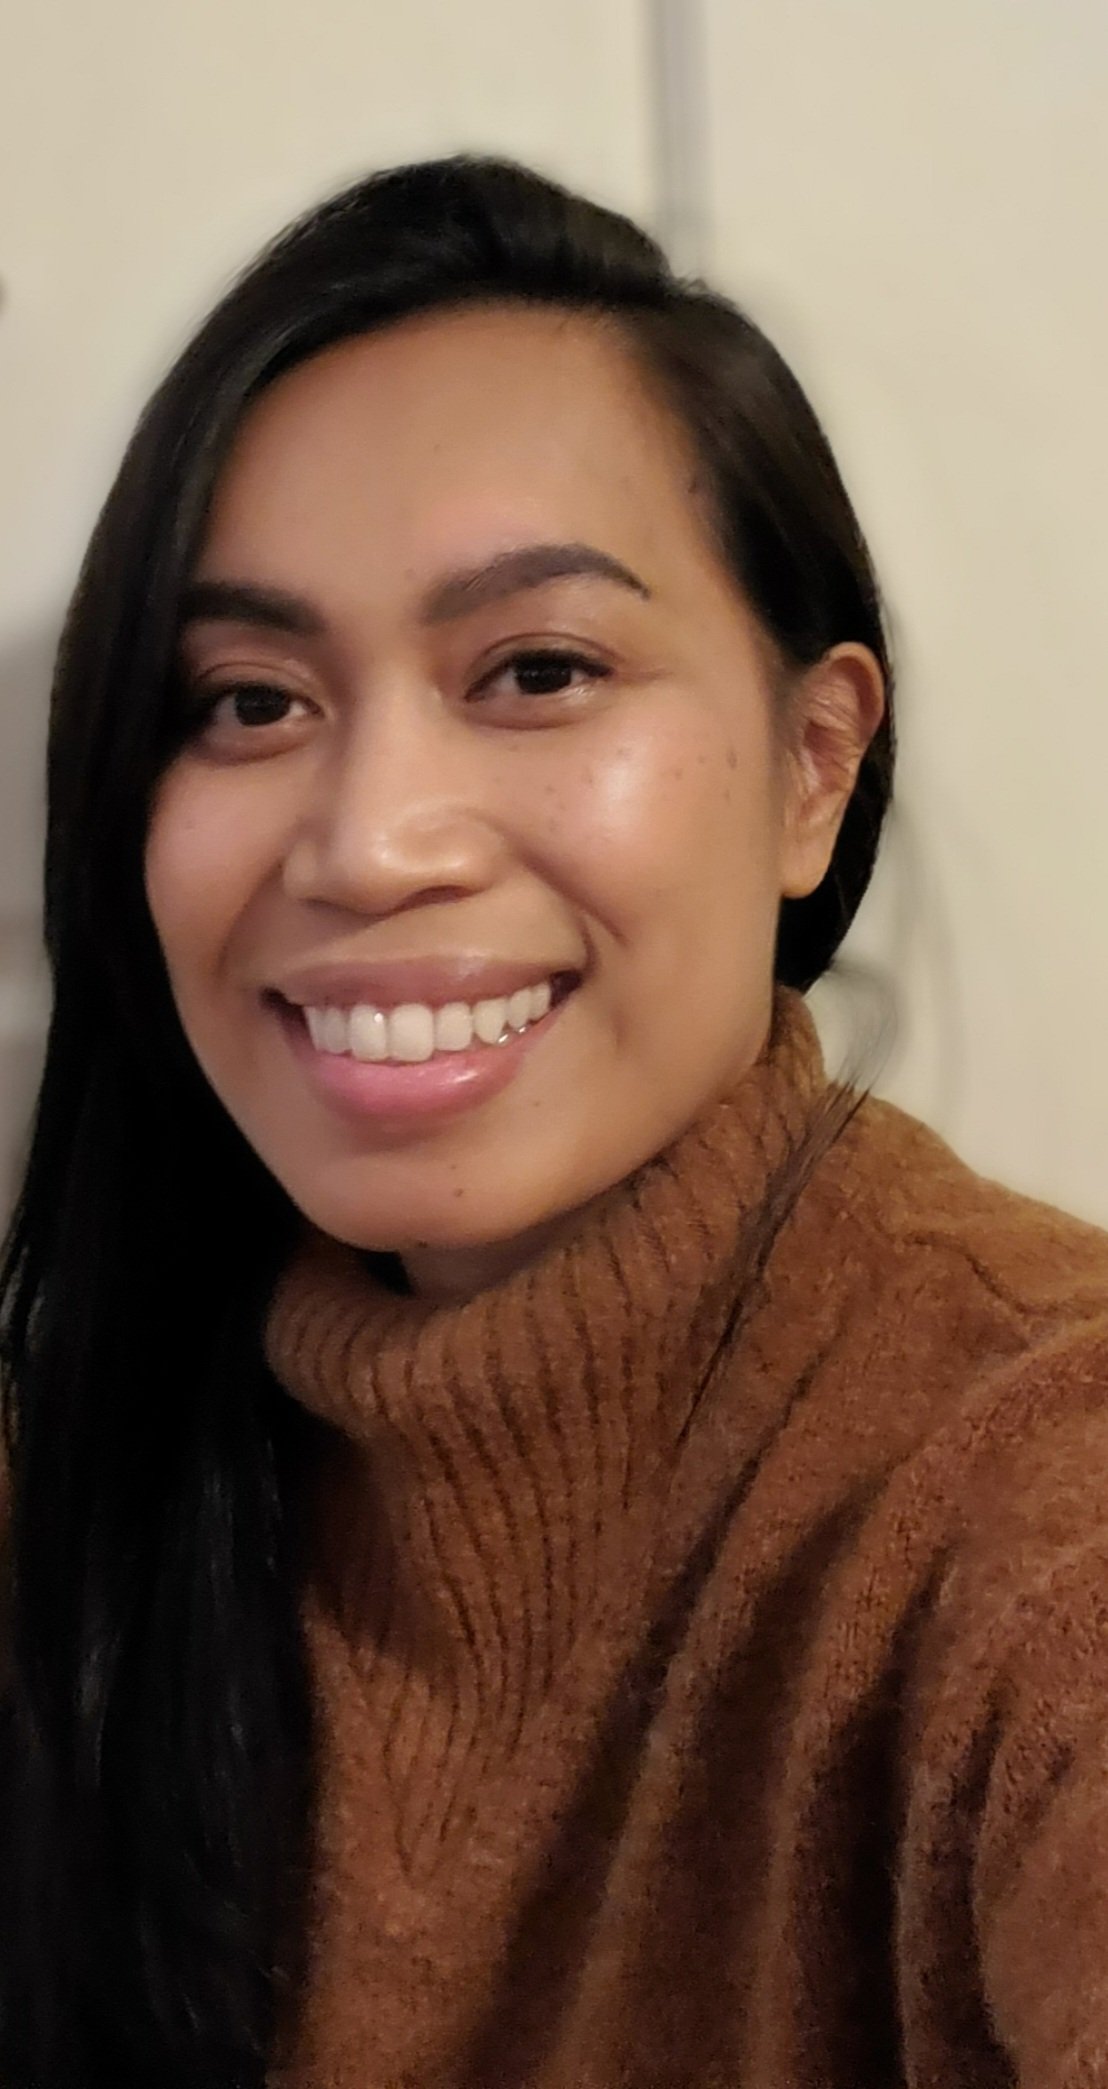 Lea wears a chestnut sweater against a white backdrop. She has long black hair, brown skin, and a wide smile, showing her teeth. 
